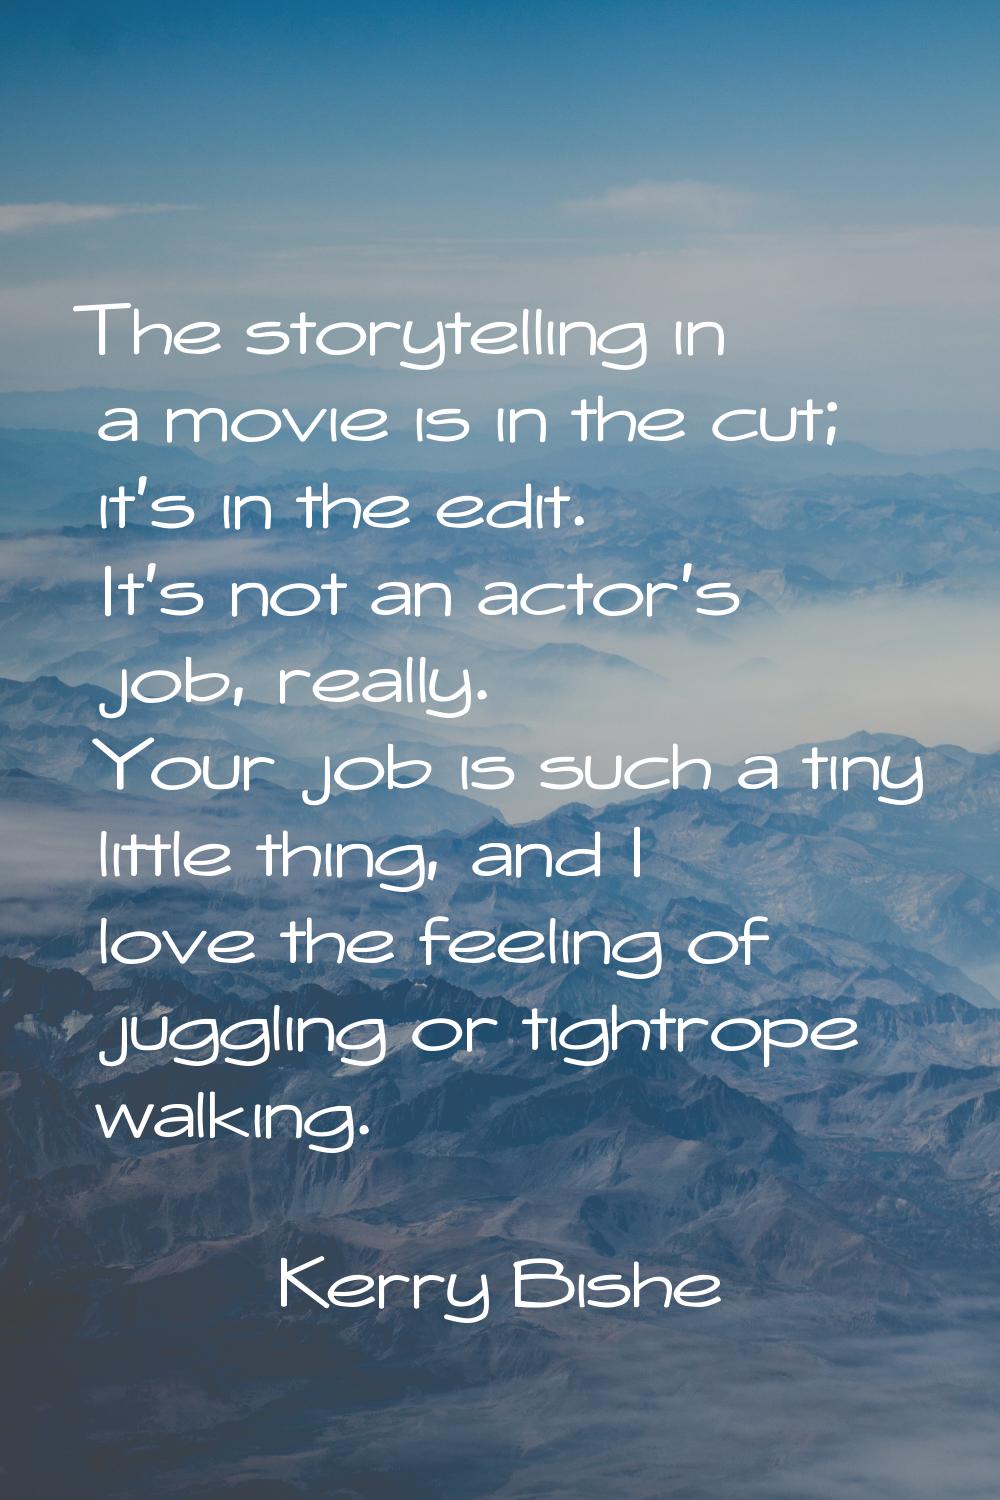 The storytelling in a movie is in the cut; it's in the edit. It's not an actor's job, really. Your 